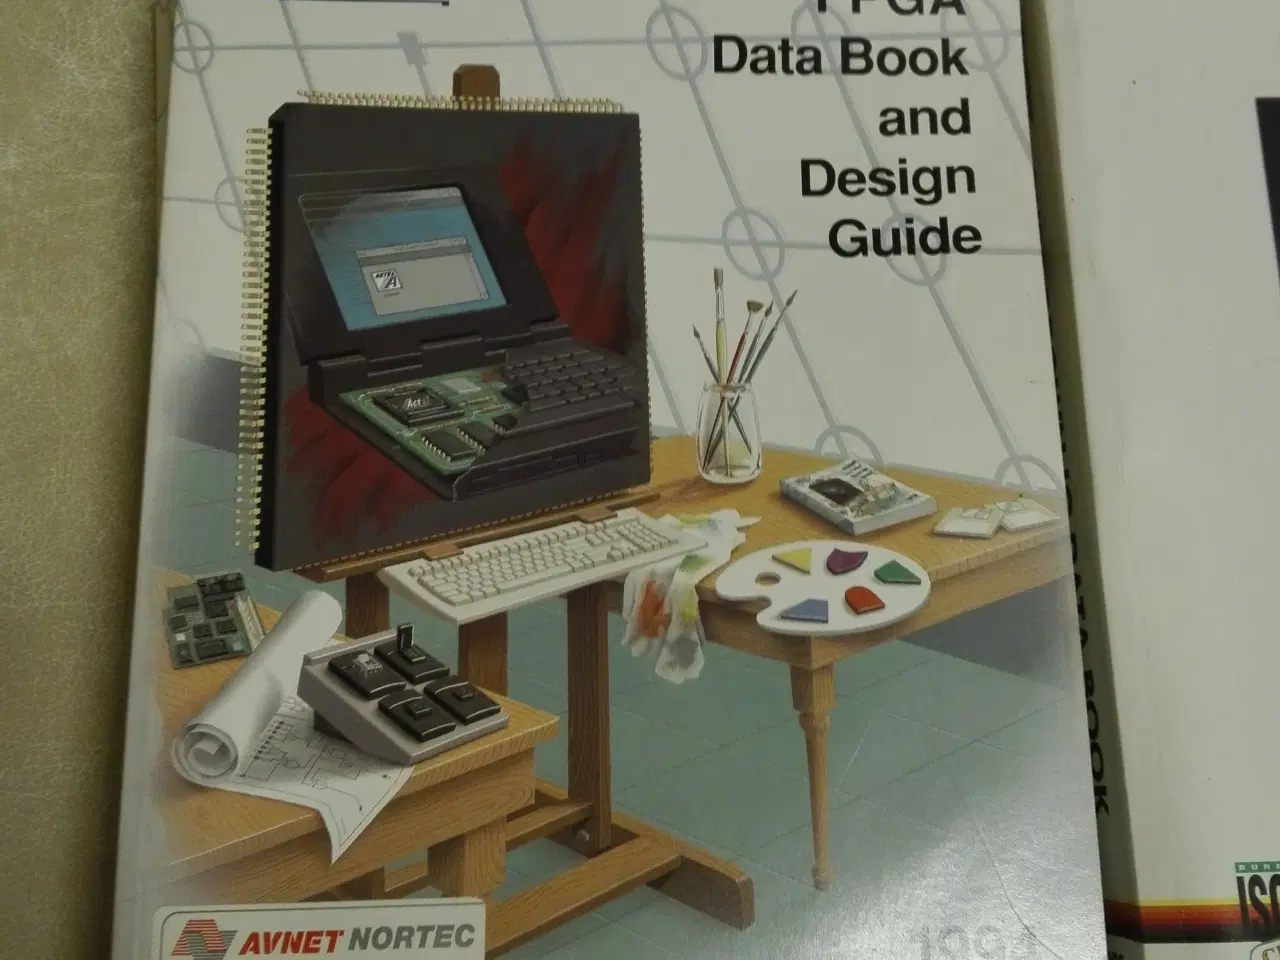 Billede 3 - IC Data Book, Data Acquisition Products